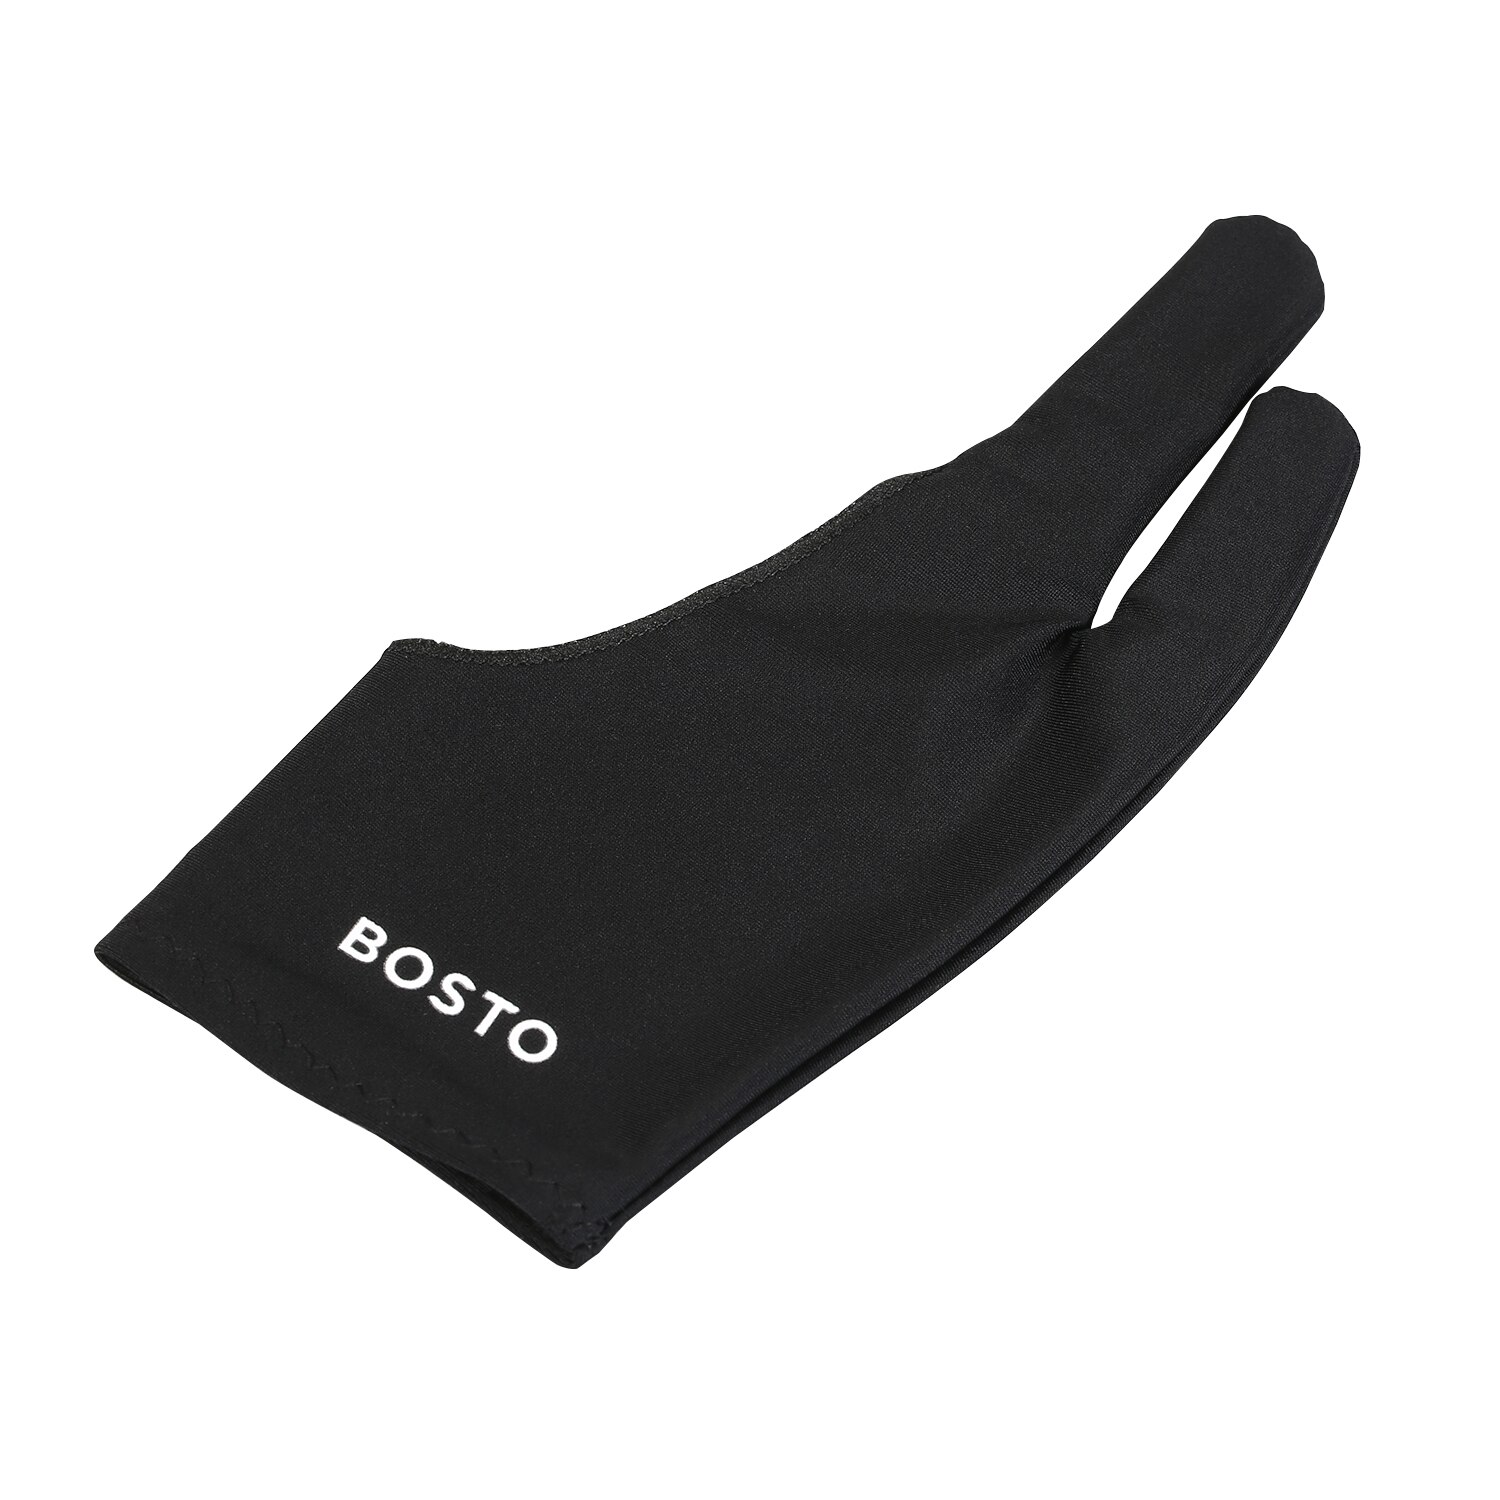 Tablet Drawing Glove Two-Finger Free Size Drawing Glove Artist for BOSTO/UGEE/Huion/Wacom Graphics Drawing Tablets